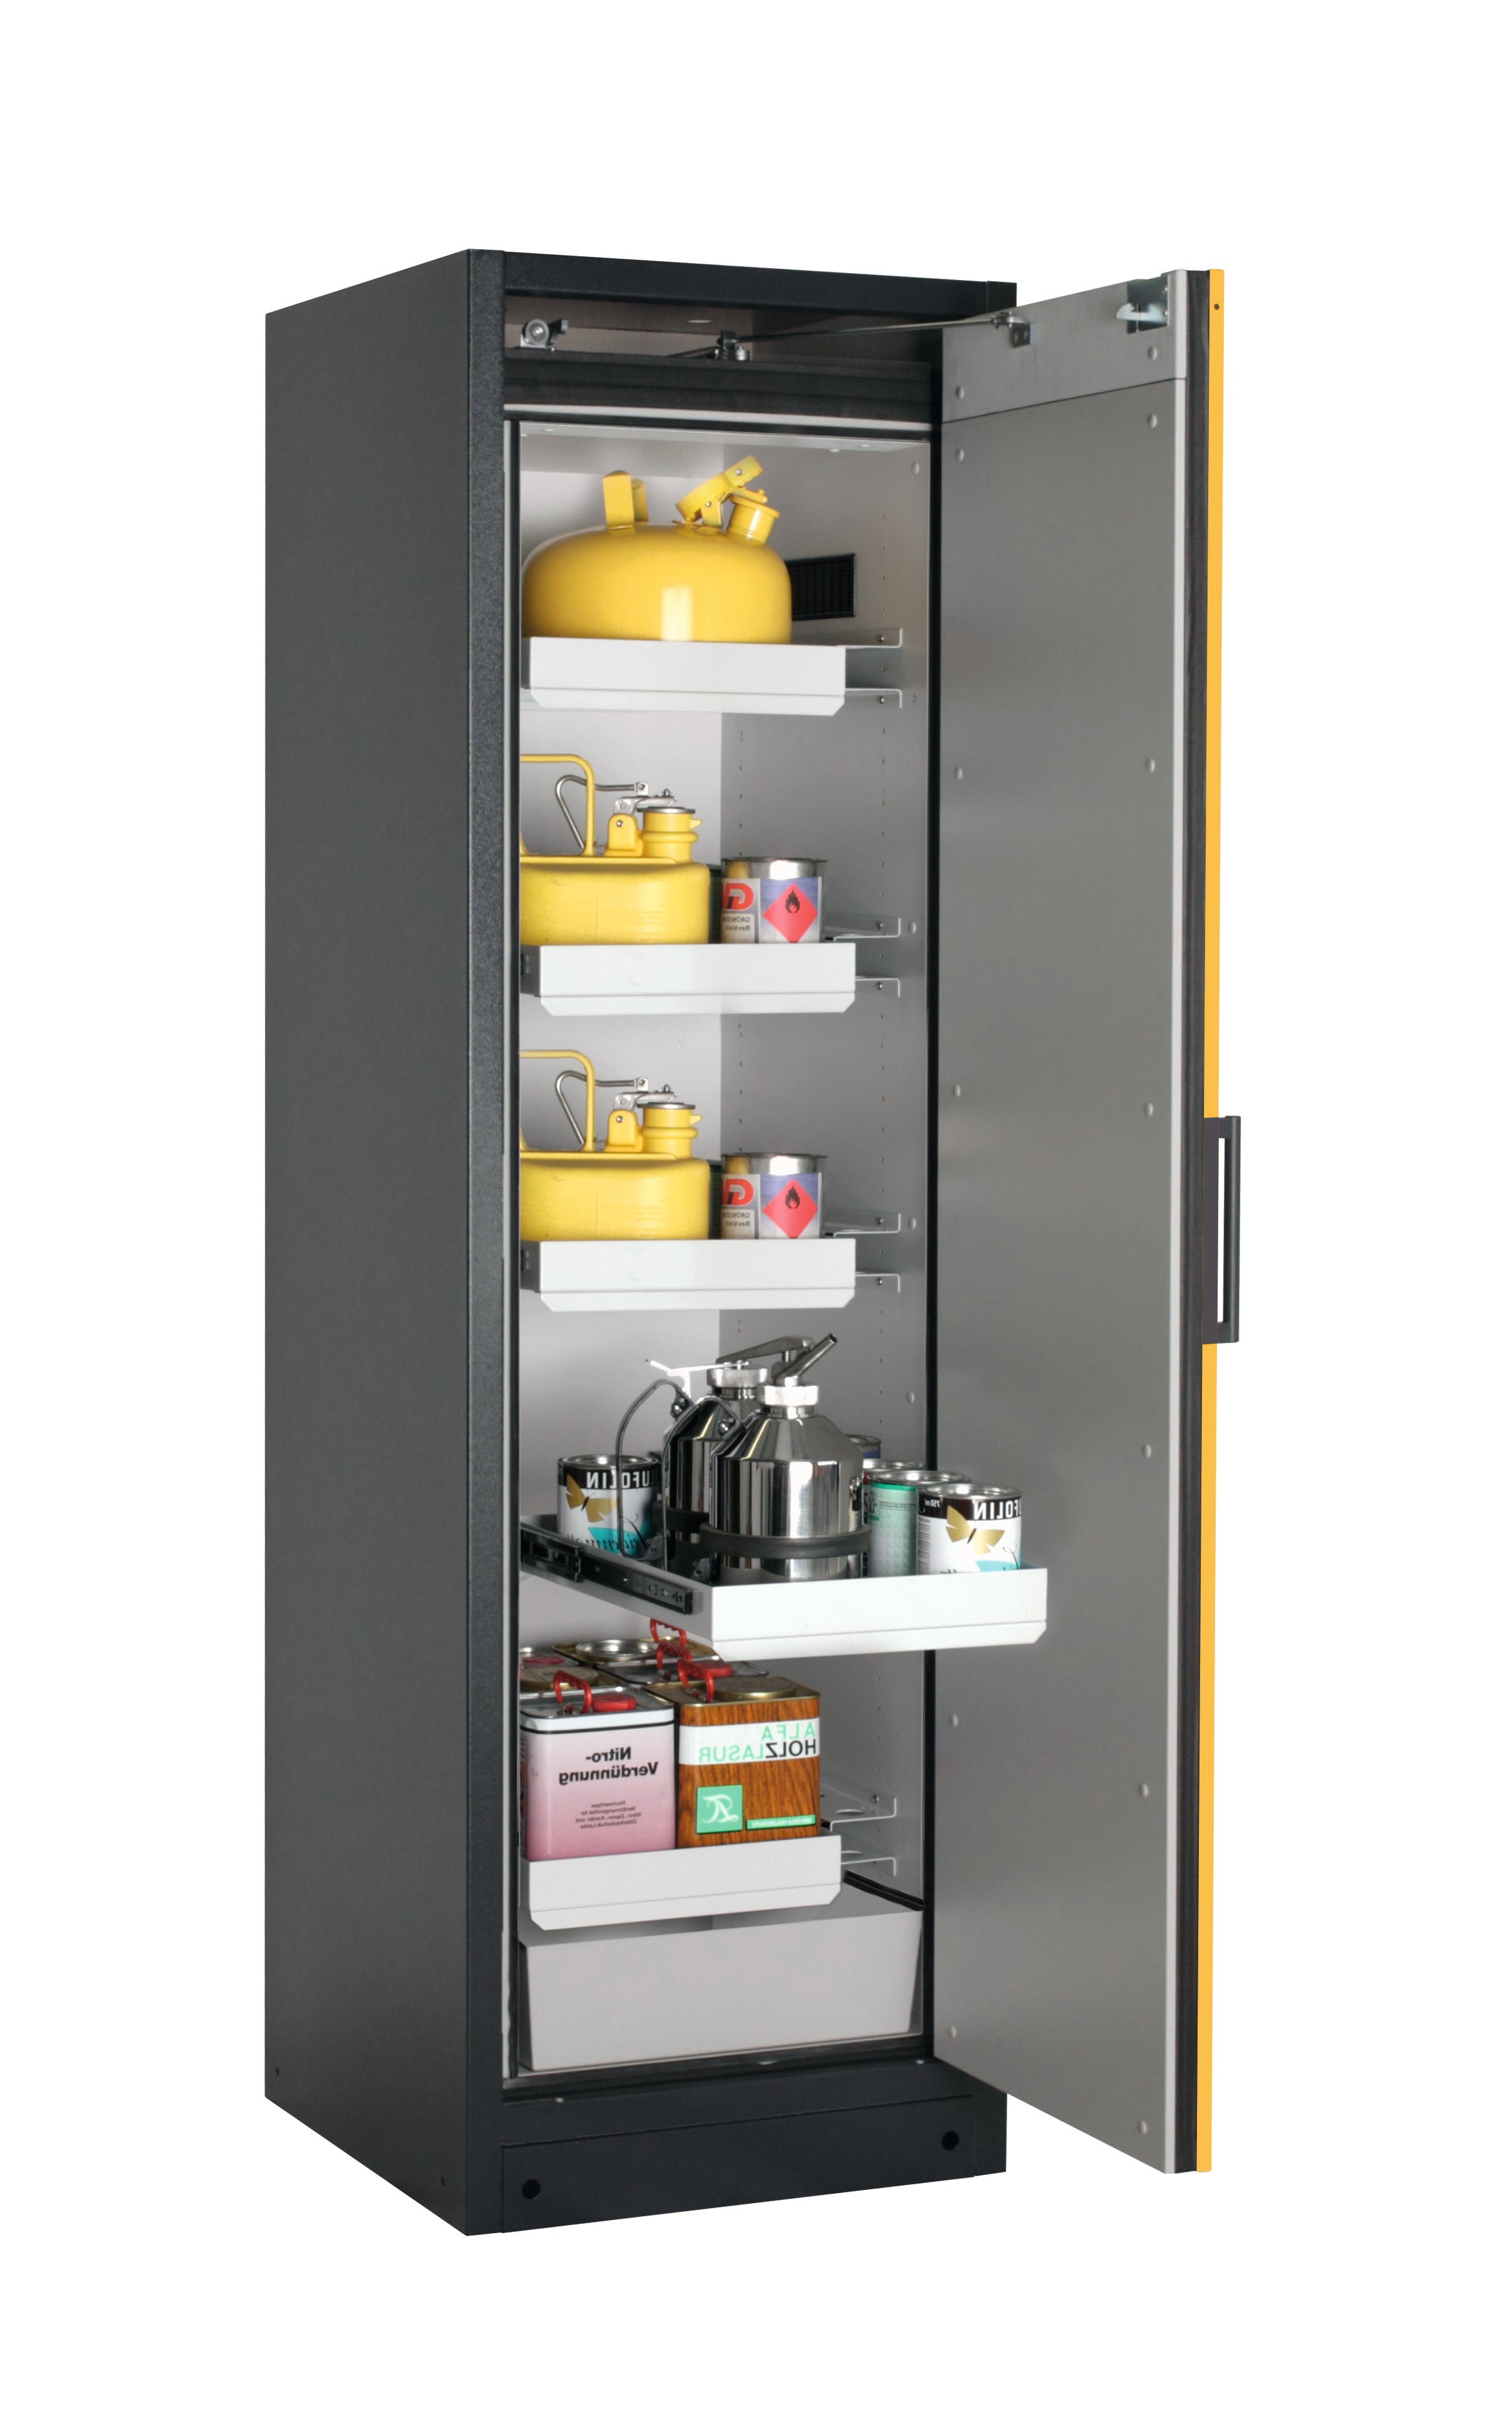 Type 90 safety storage cabinet Q-PEGASUS-90 model Q90.195.060.WDACR in warning yellow RAL 1004 with 4x drawer (standard) (sheet steel),